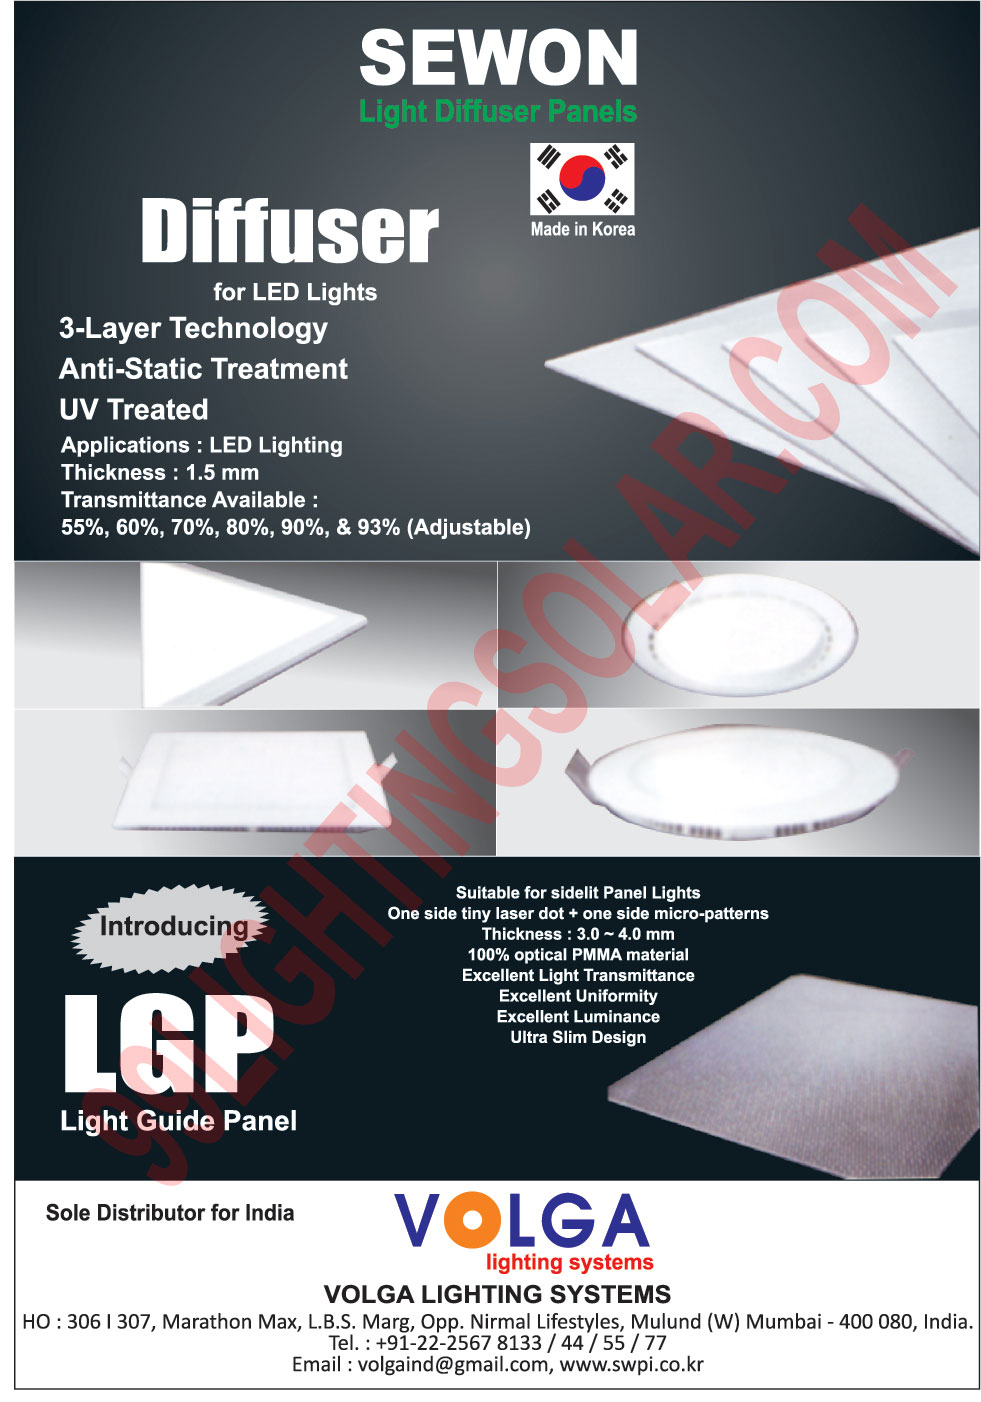 Led Light Diffusers, Light Diffuser Panels, Light Guide Panels,Diffuser